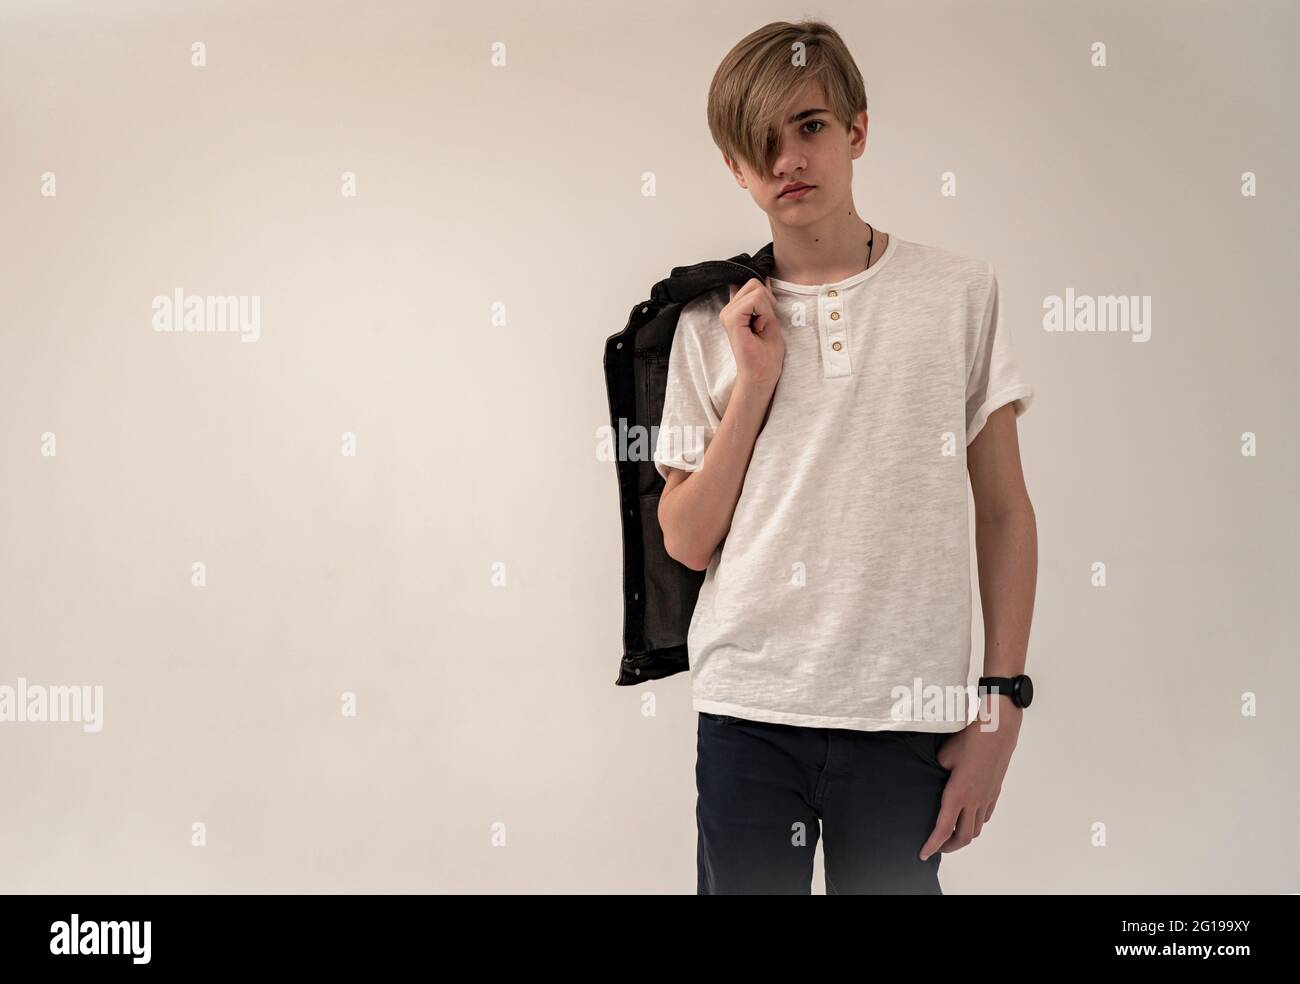 High school student teenager with a sad expression on his face. Cute pretty  teenager boy in casual clothes Stock Photo - Alamy